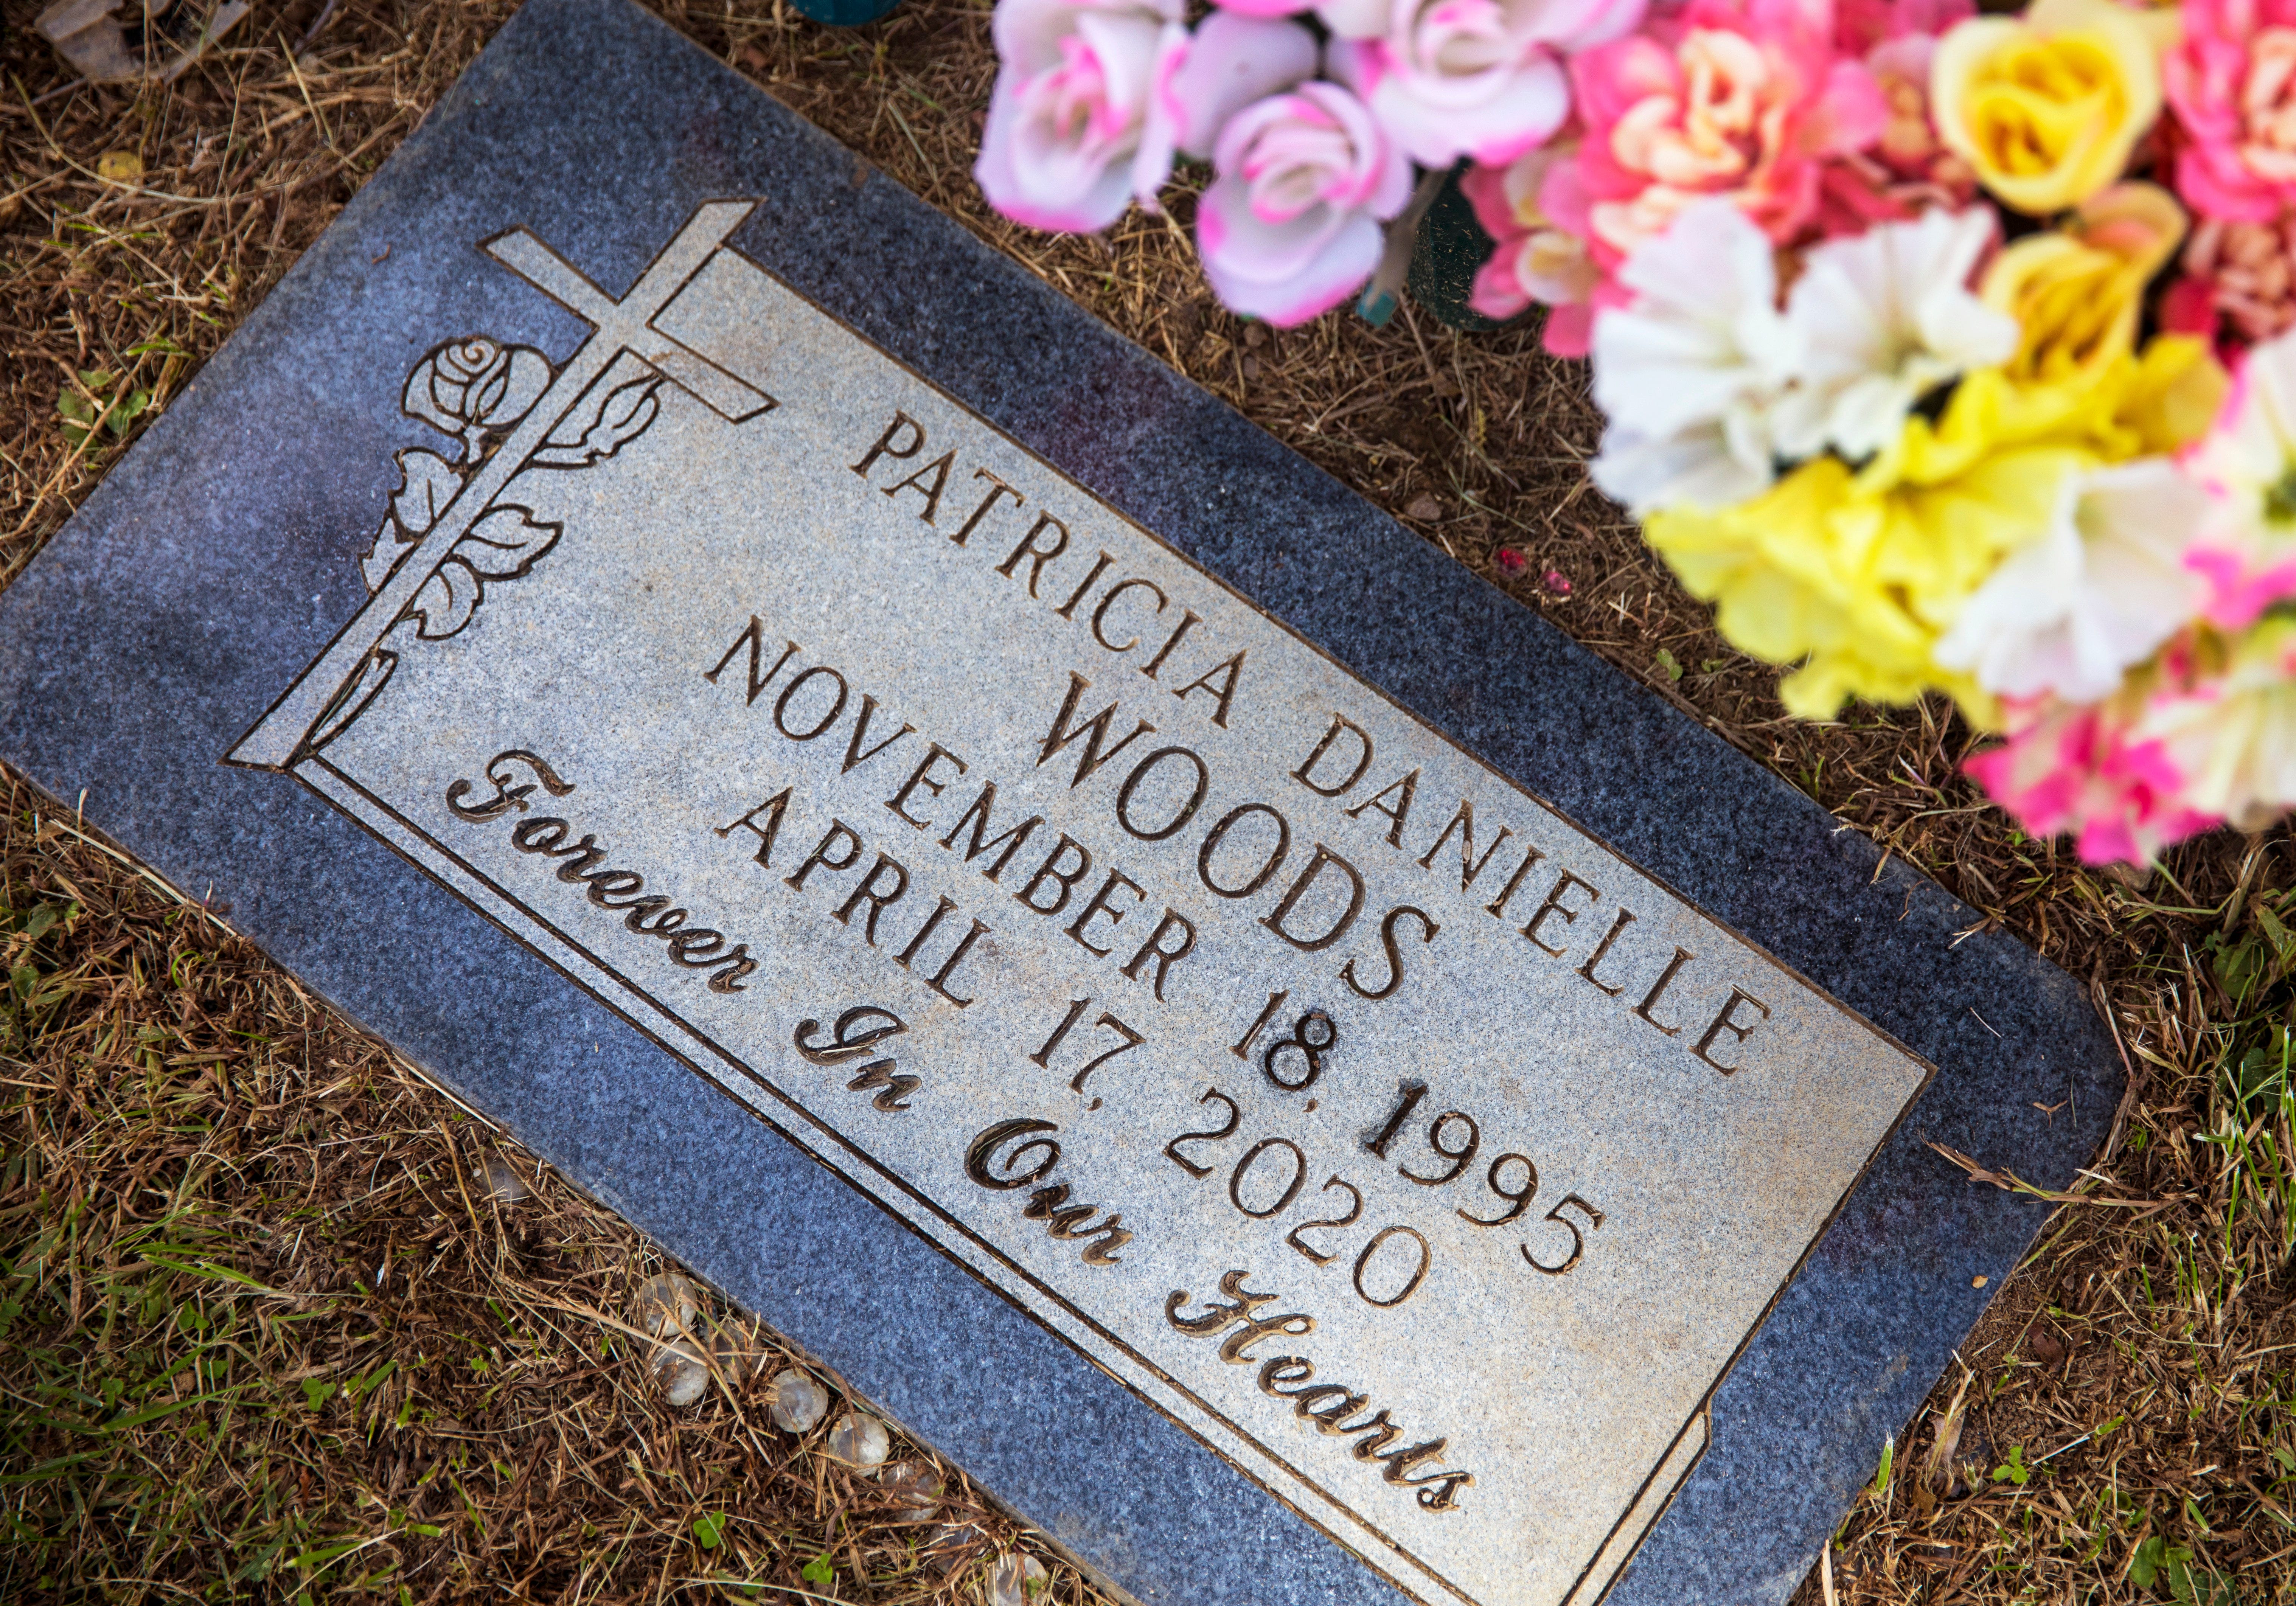 The marker for Patricia Woods, 24, at Cincinnati's Vine Street Hill Cemetery Sept. 30, 2021. She was killed April 17, 2020, in her Westwood apartment while her children, Kayden, then 5, and Kay-Lia, then 14 months, slept. Kayden fled to neighbors for help. Marcus Reed, who Woods was dating, is charged with aggravated murder.